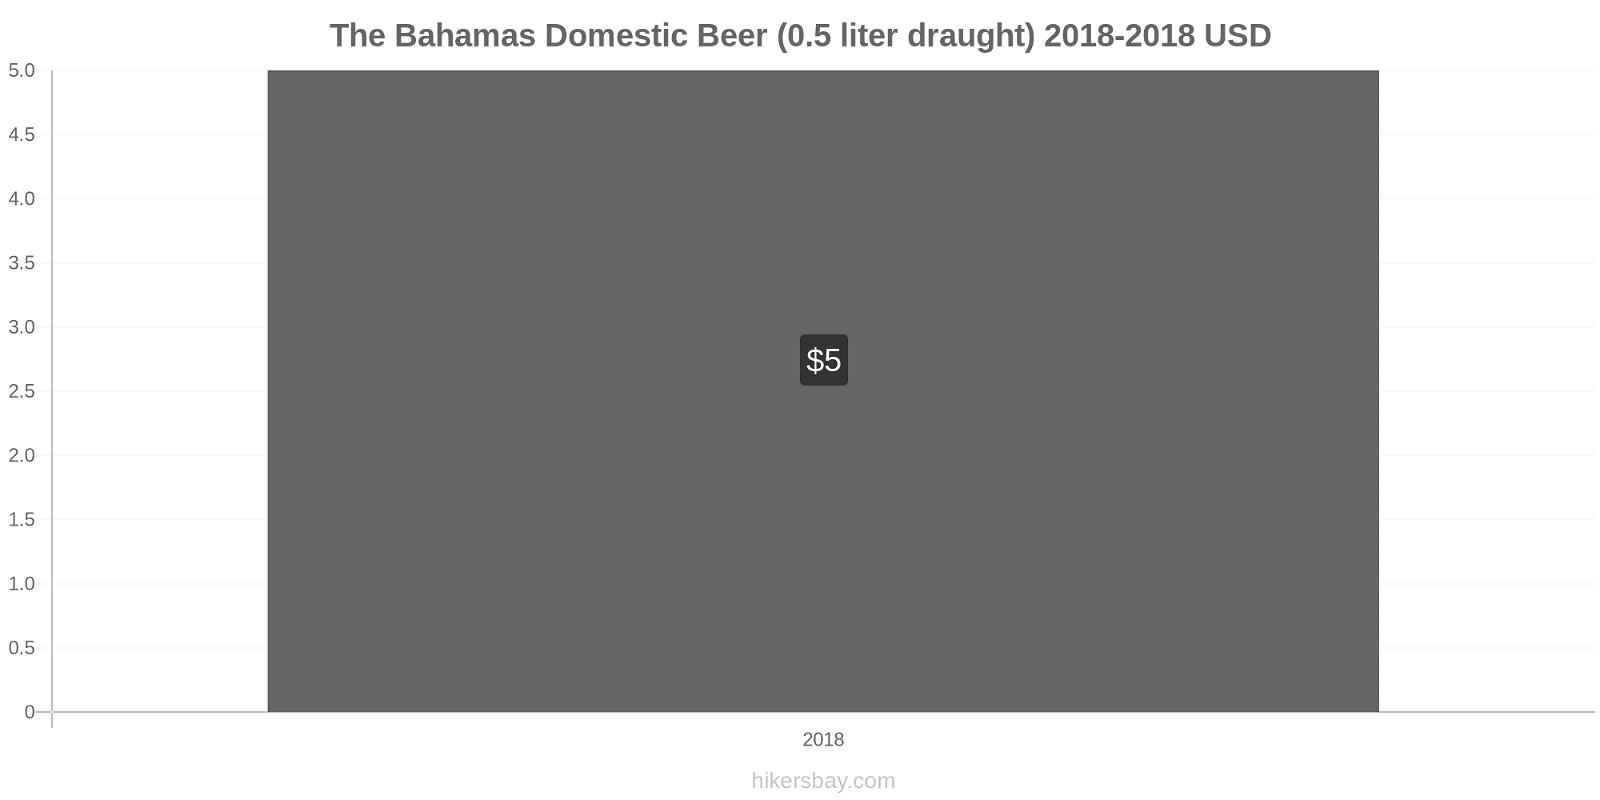 The Bahamas price changes Domestic Beer (0.5 liter draught) hikersbay.com